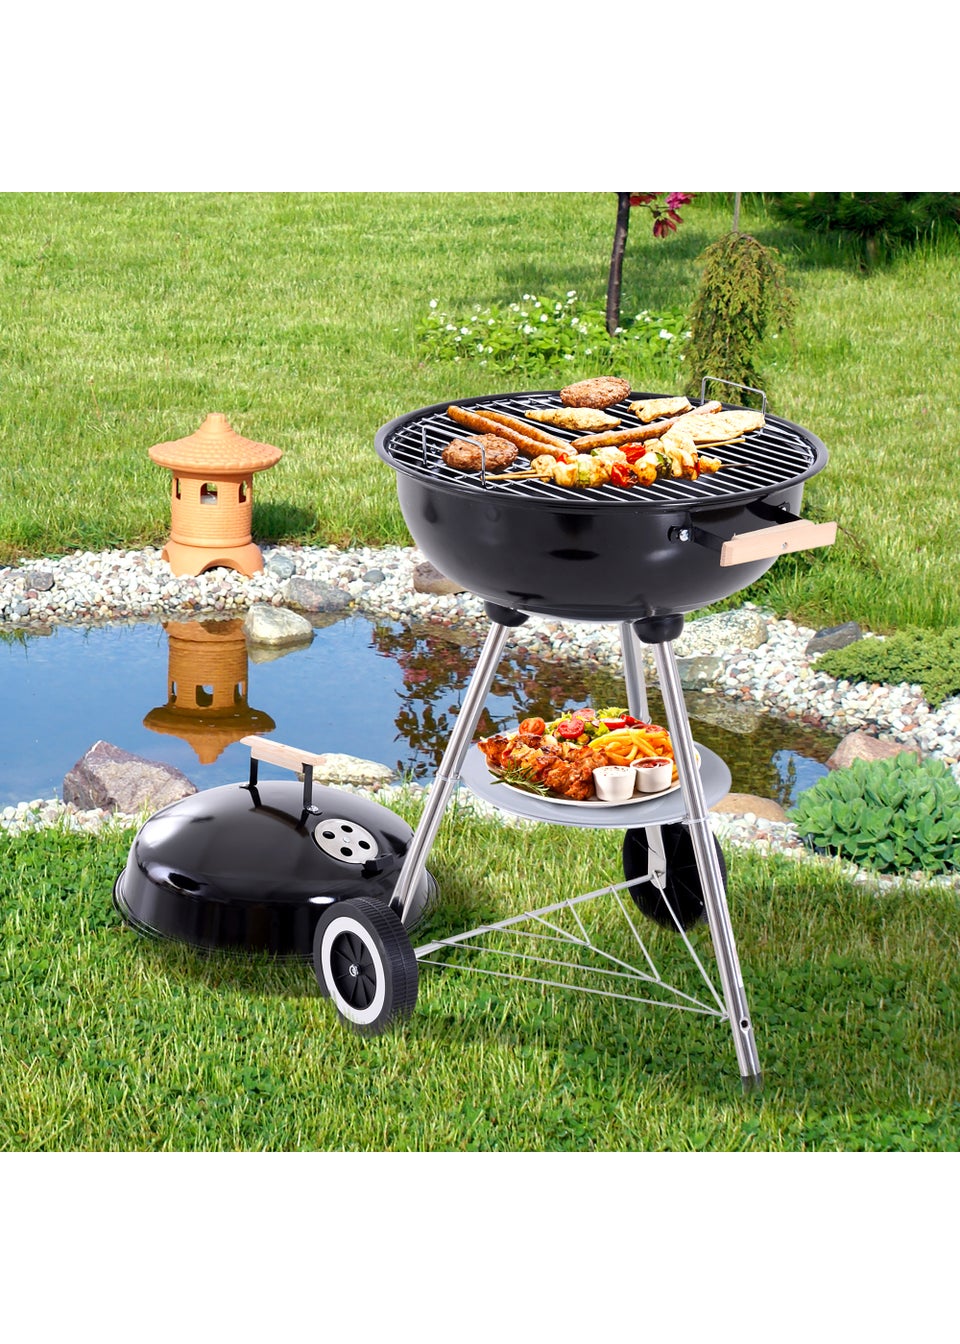 Outsunny Portable Round Charcoal Barbecue Grill (48cm x 56cm x 85cm)